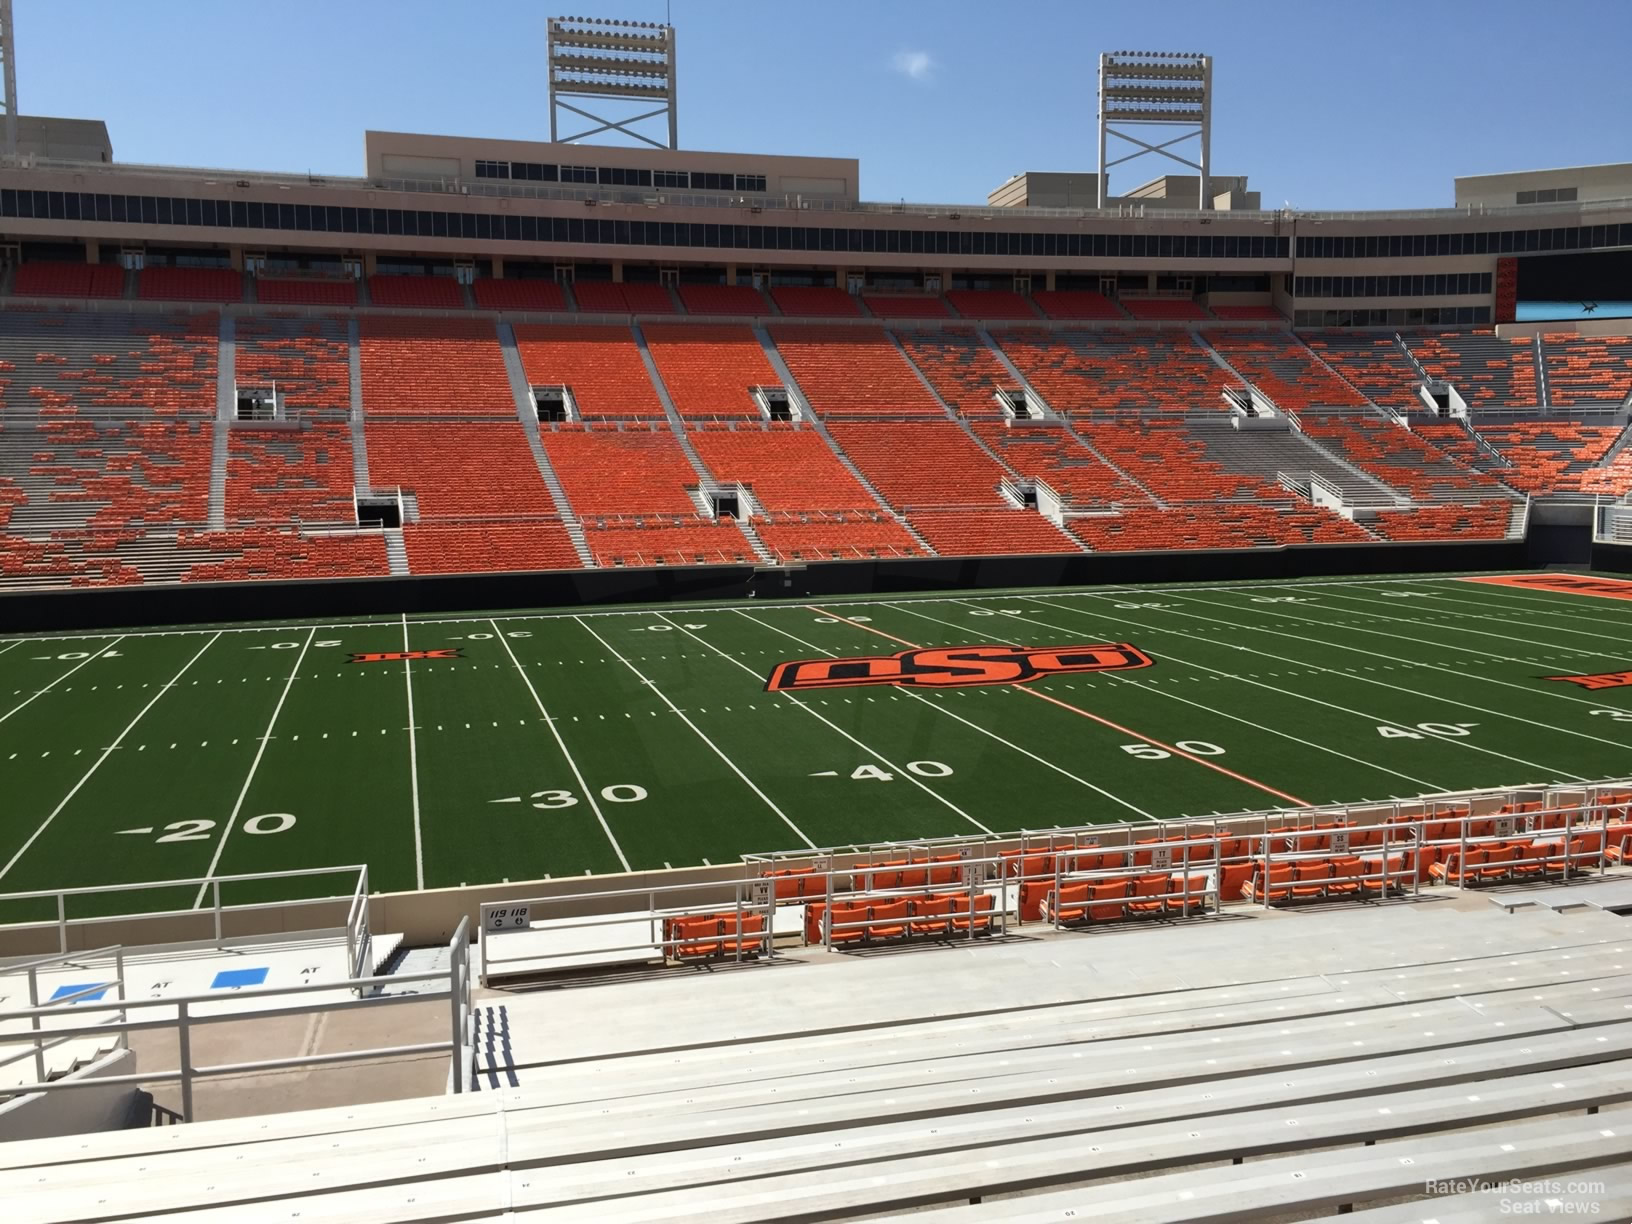 section 226, row 20 seat view  - boone pickens stadium